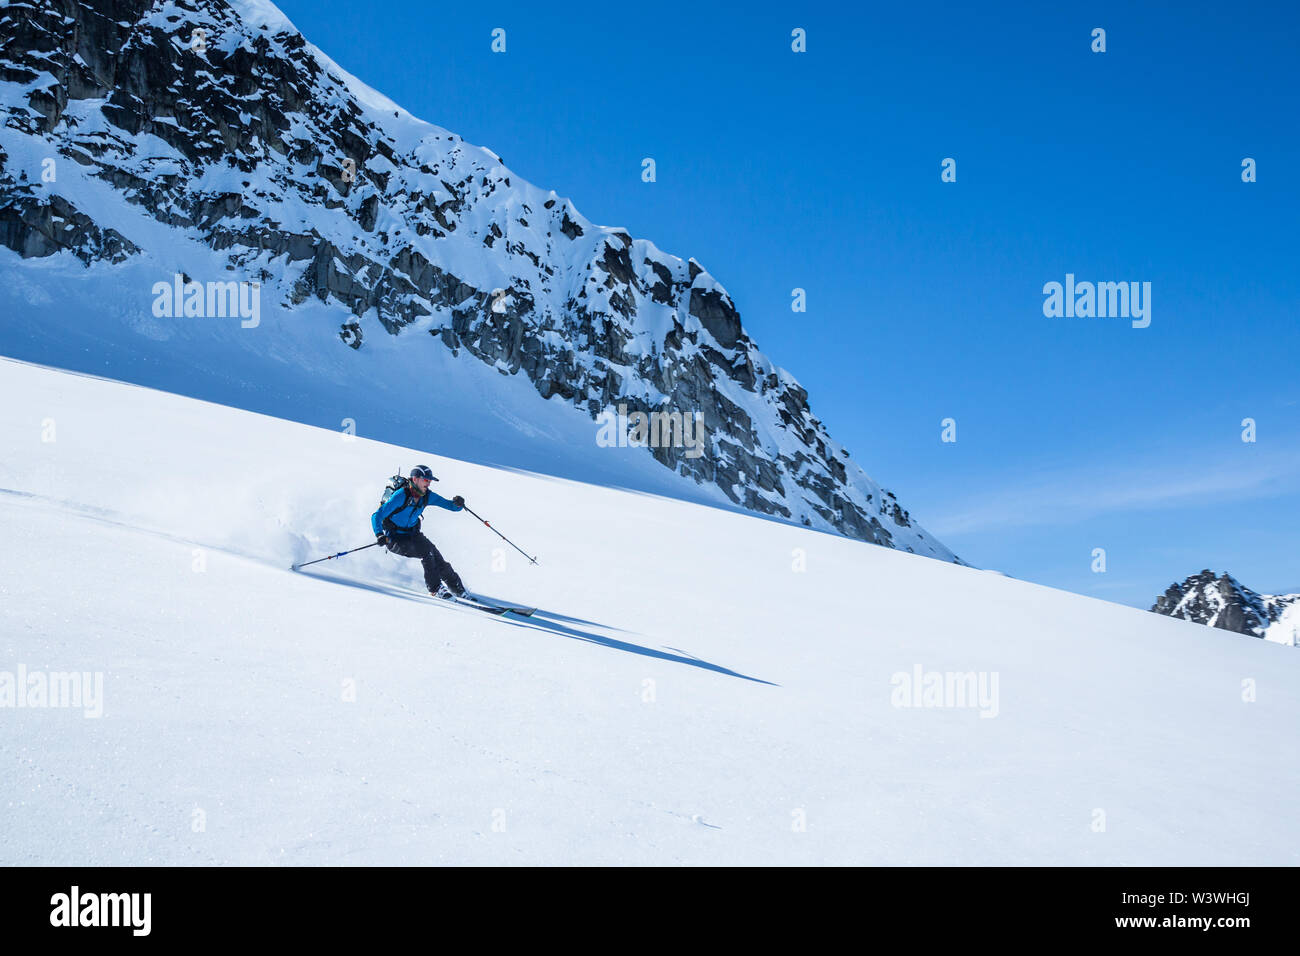 Soft snow on a bluebird day, a skier rips downhill in teh backcountry of Alaska's Talkeetna Mountains. Stock Photo